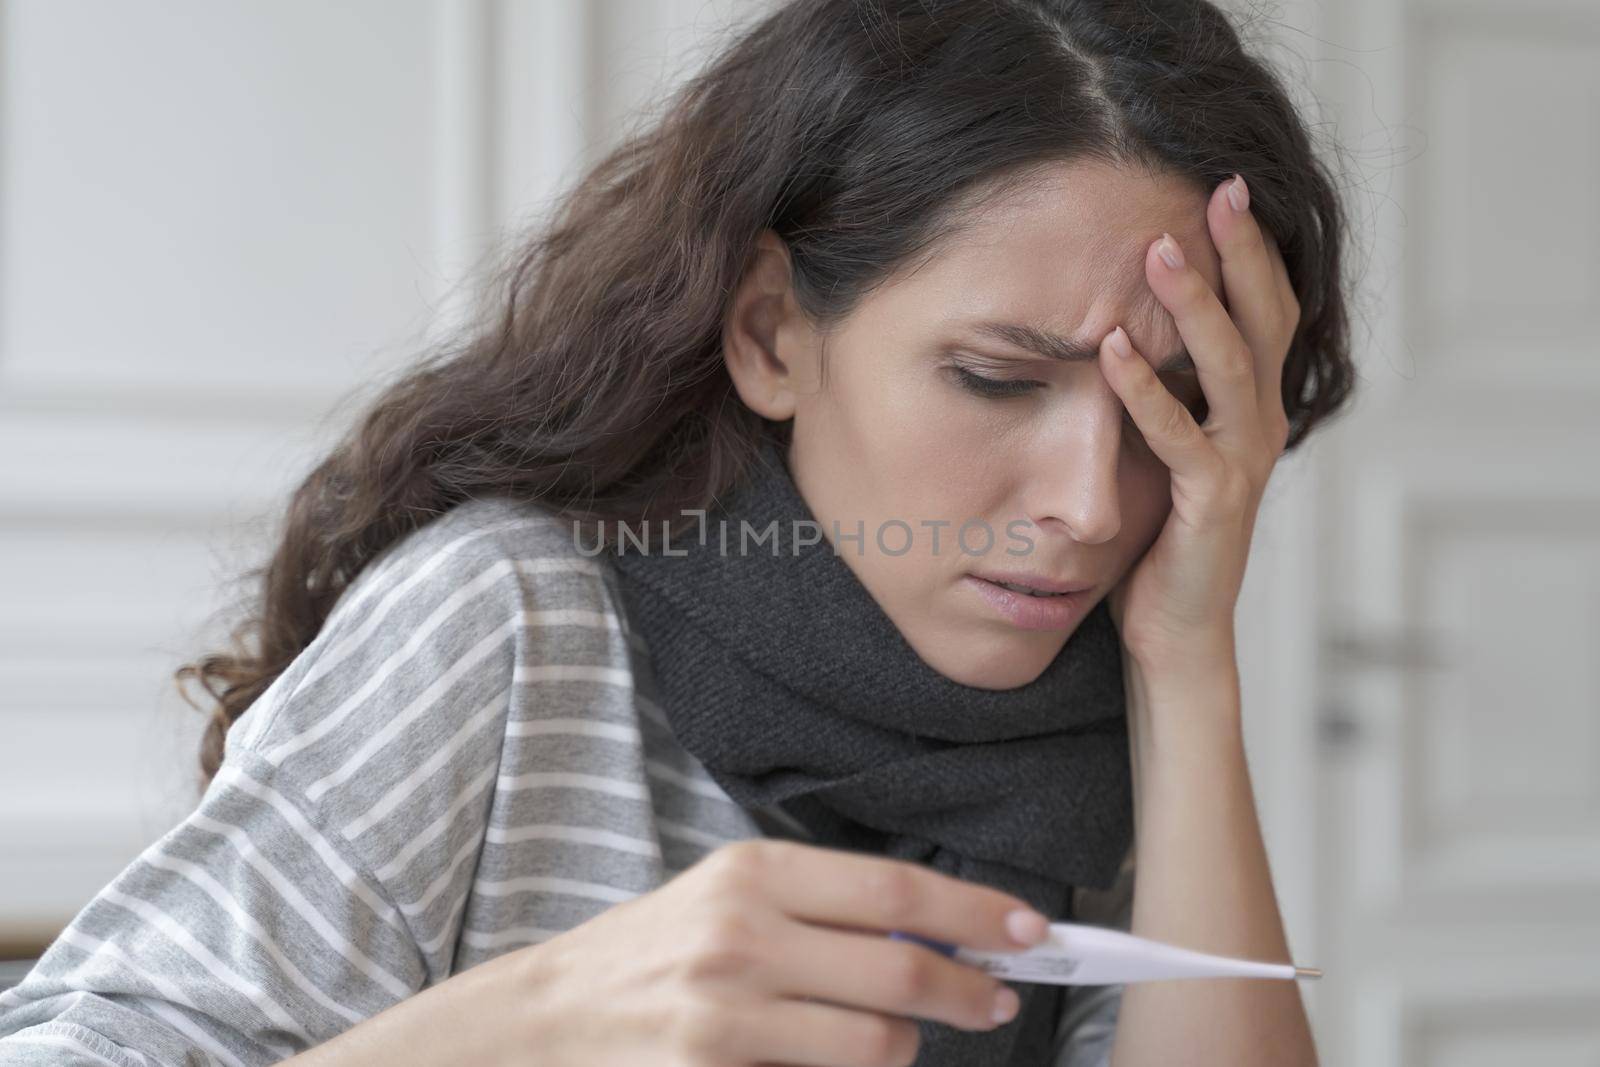 Sick diseased hispanic woman with headache measuring checking temperature with digital thermometer at home, close up photo of unhealthy female having high fever. Concept of flu or virus